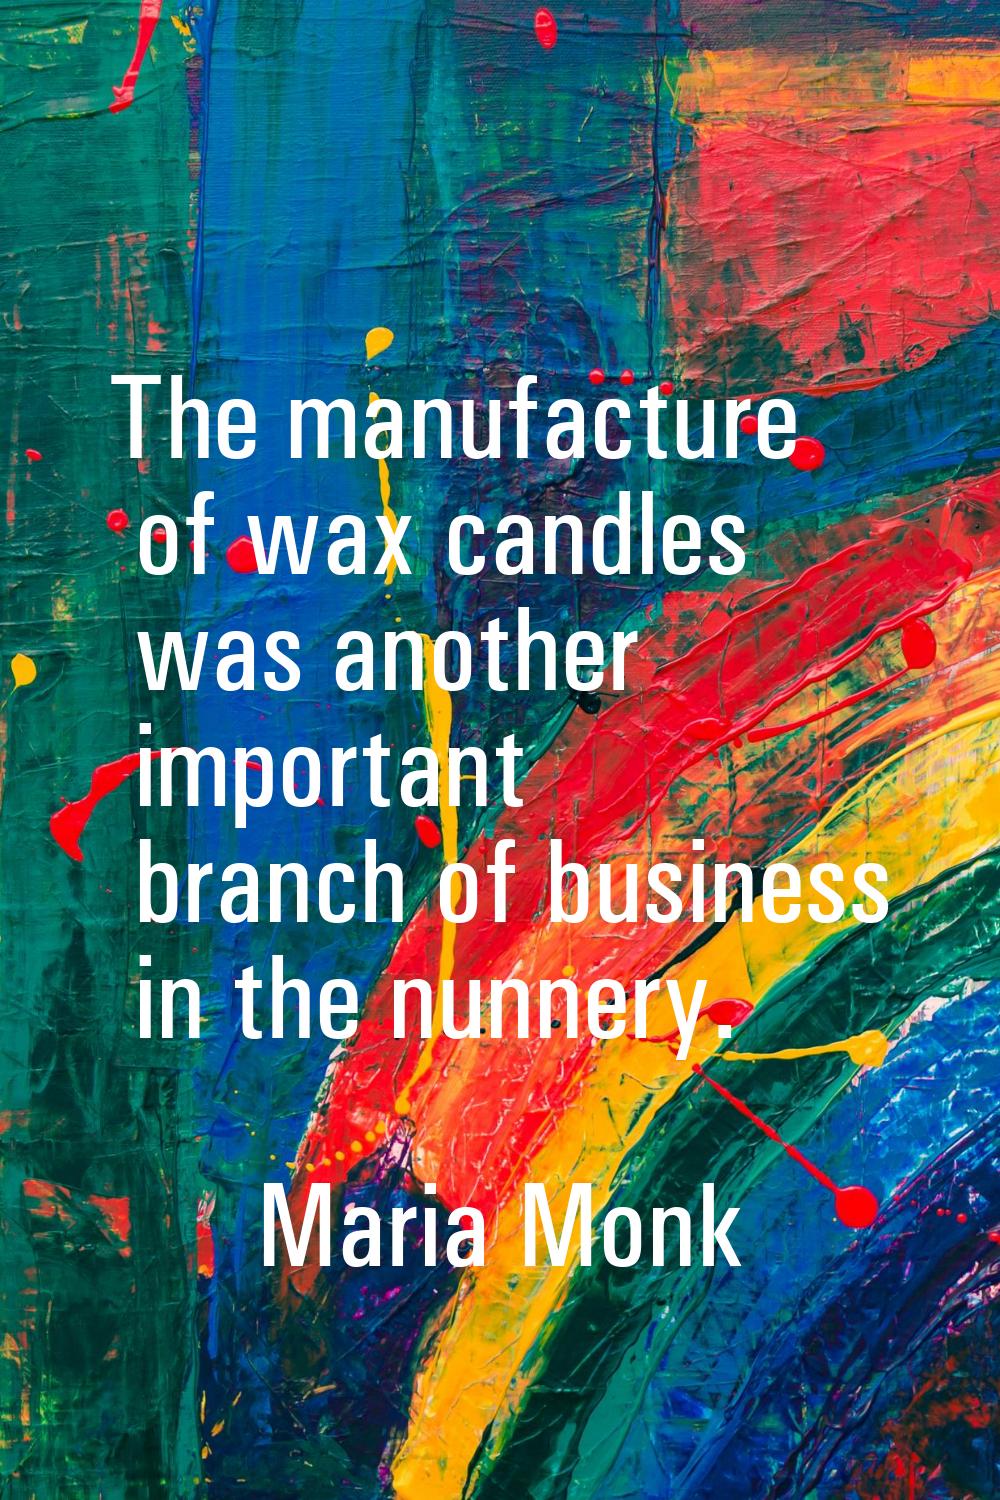 The manufacture of wax candles was another important branch of business in the nunnery.